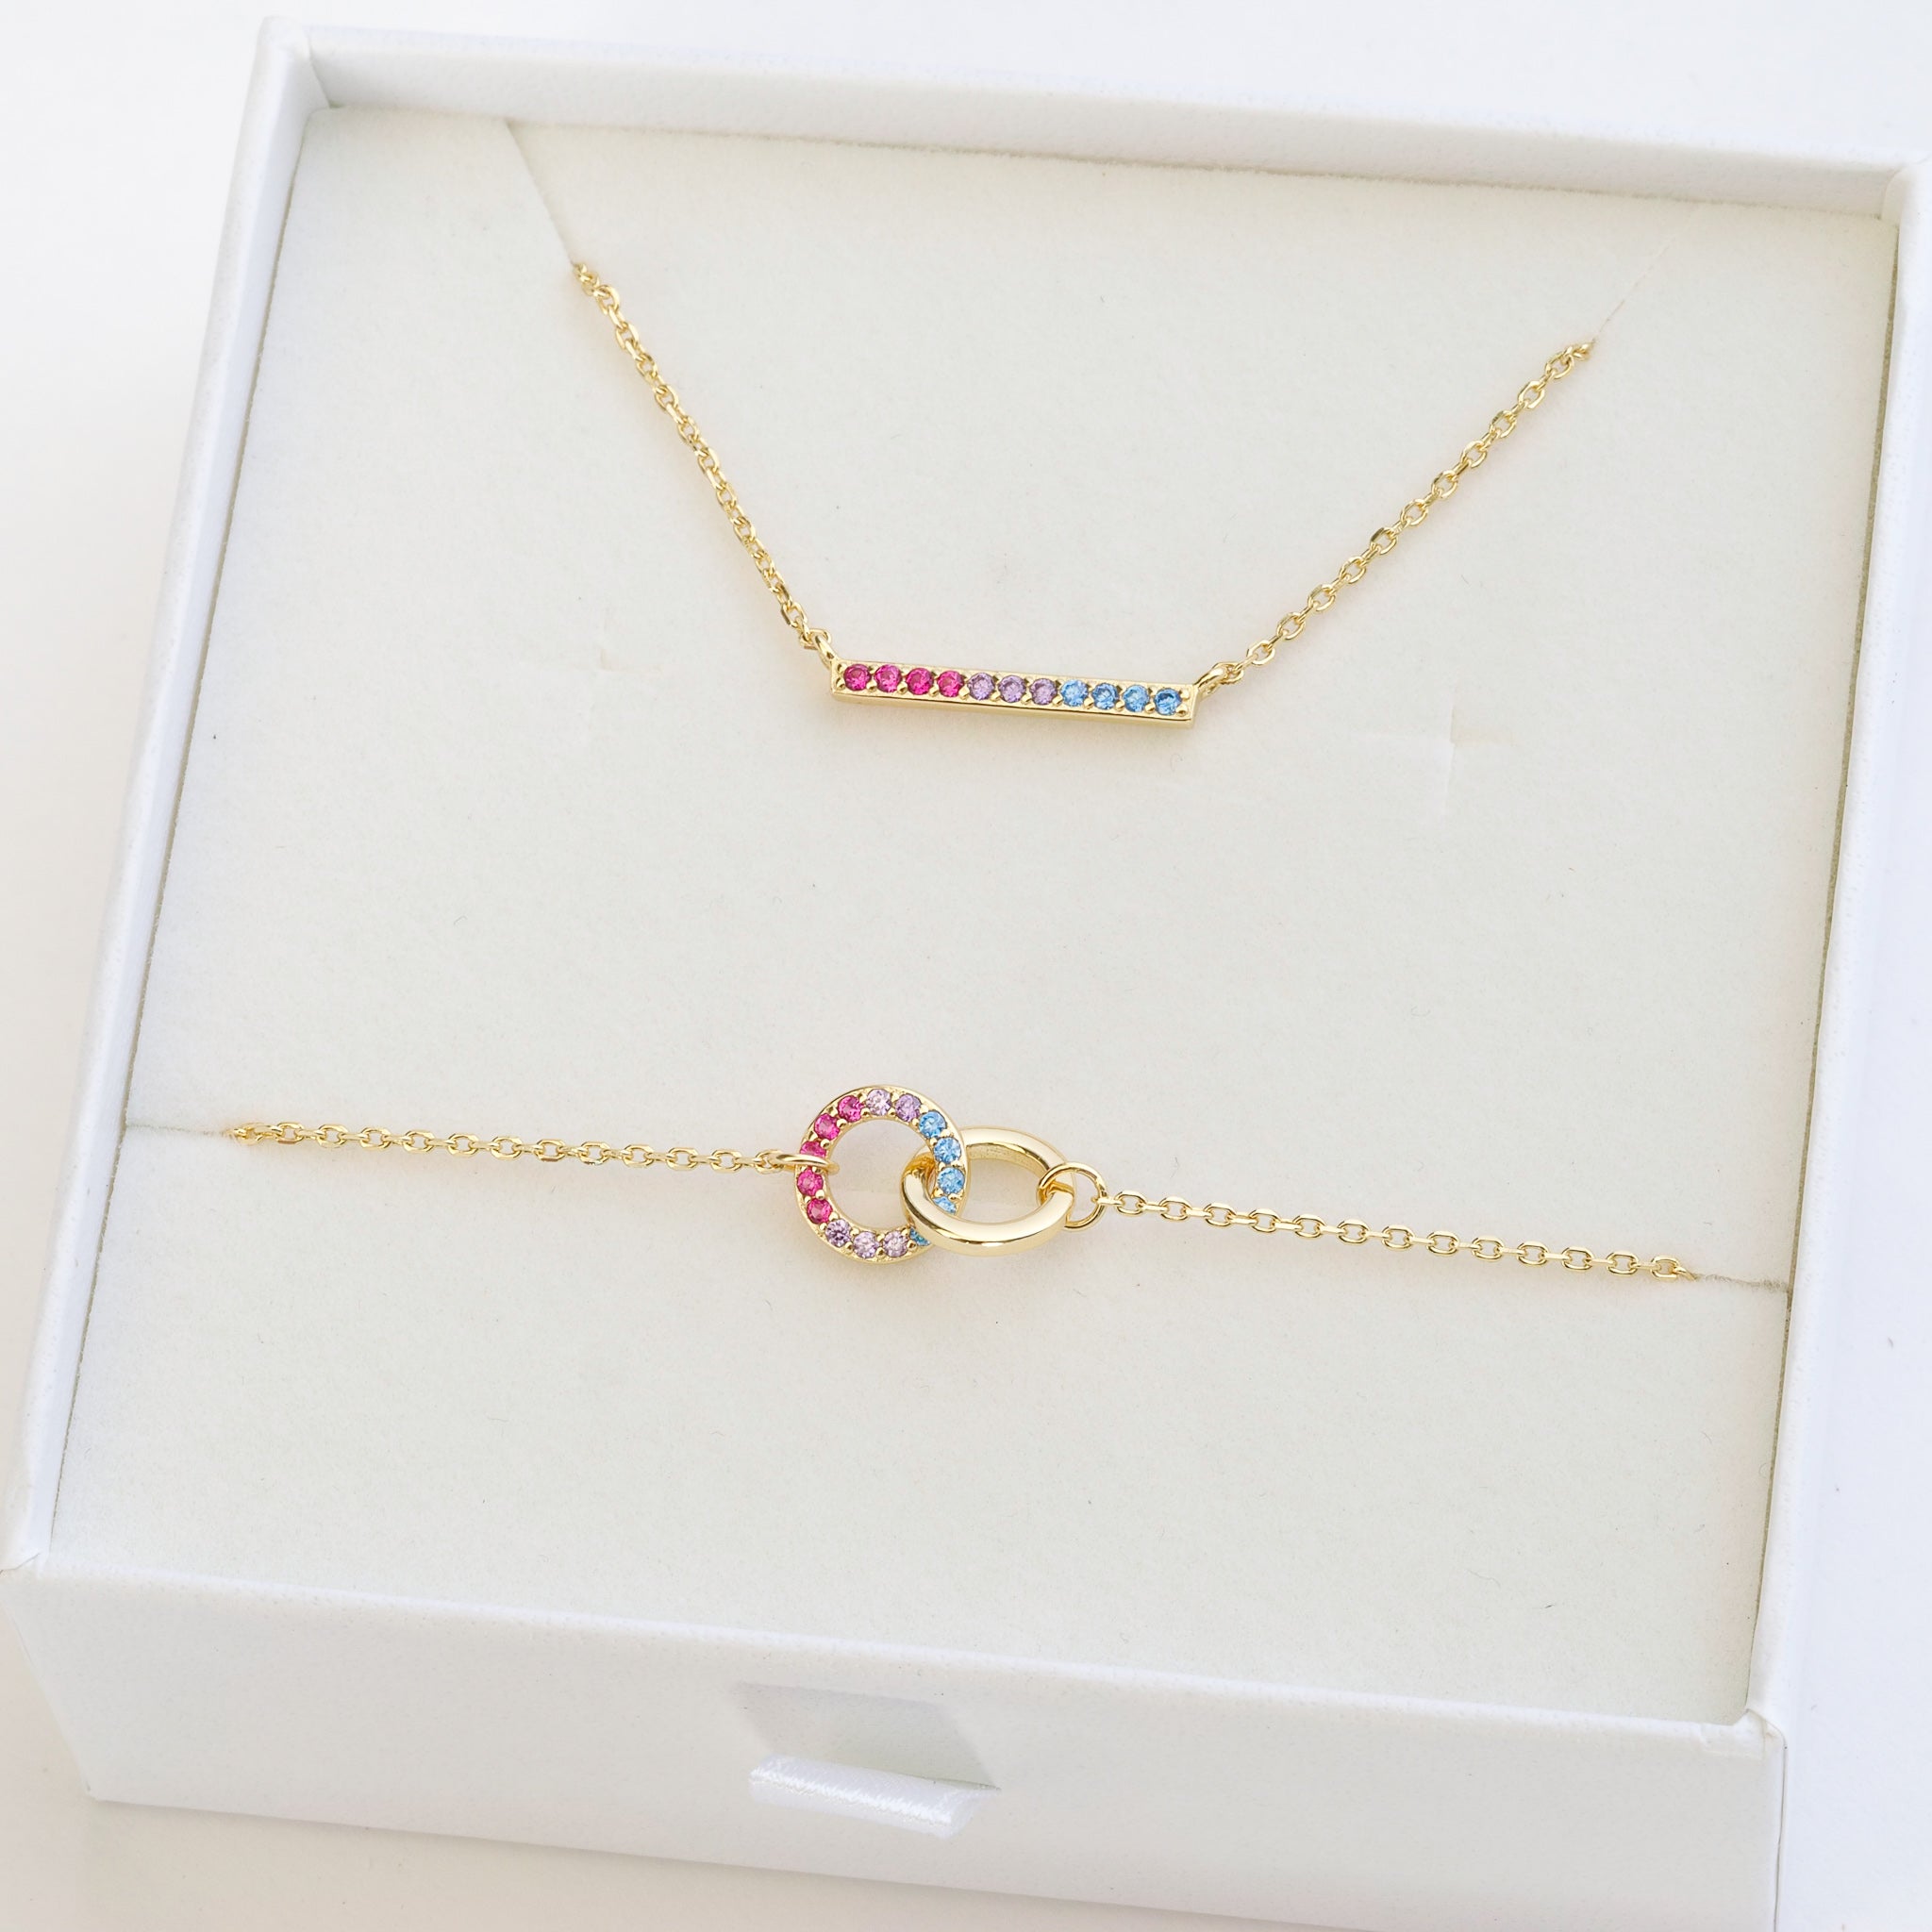 Bisexual Jewellery set with bisexual bracelet and bisexual necklace featuring colours of bisexual flag - gold